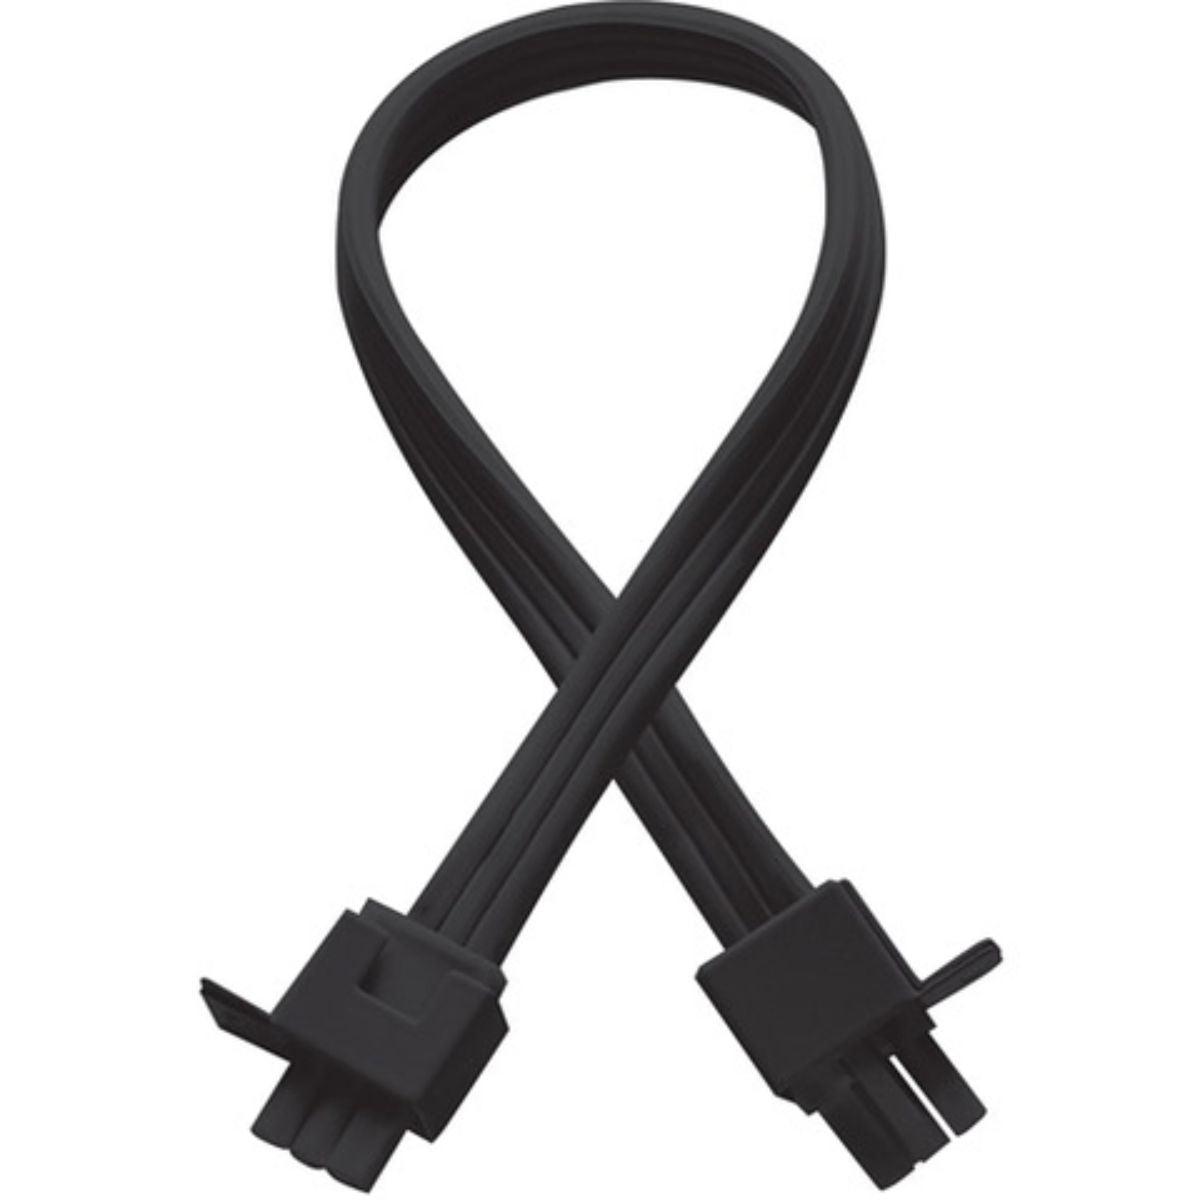 36in. Interconnect Cable For Undercabinet Lights, Black Finish